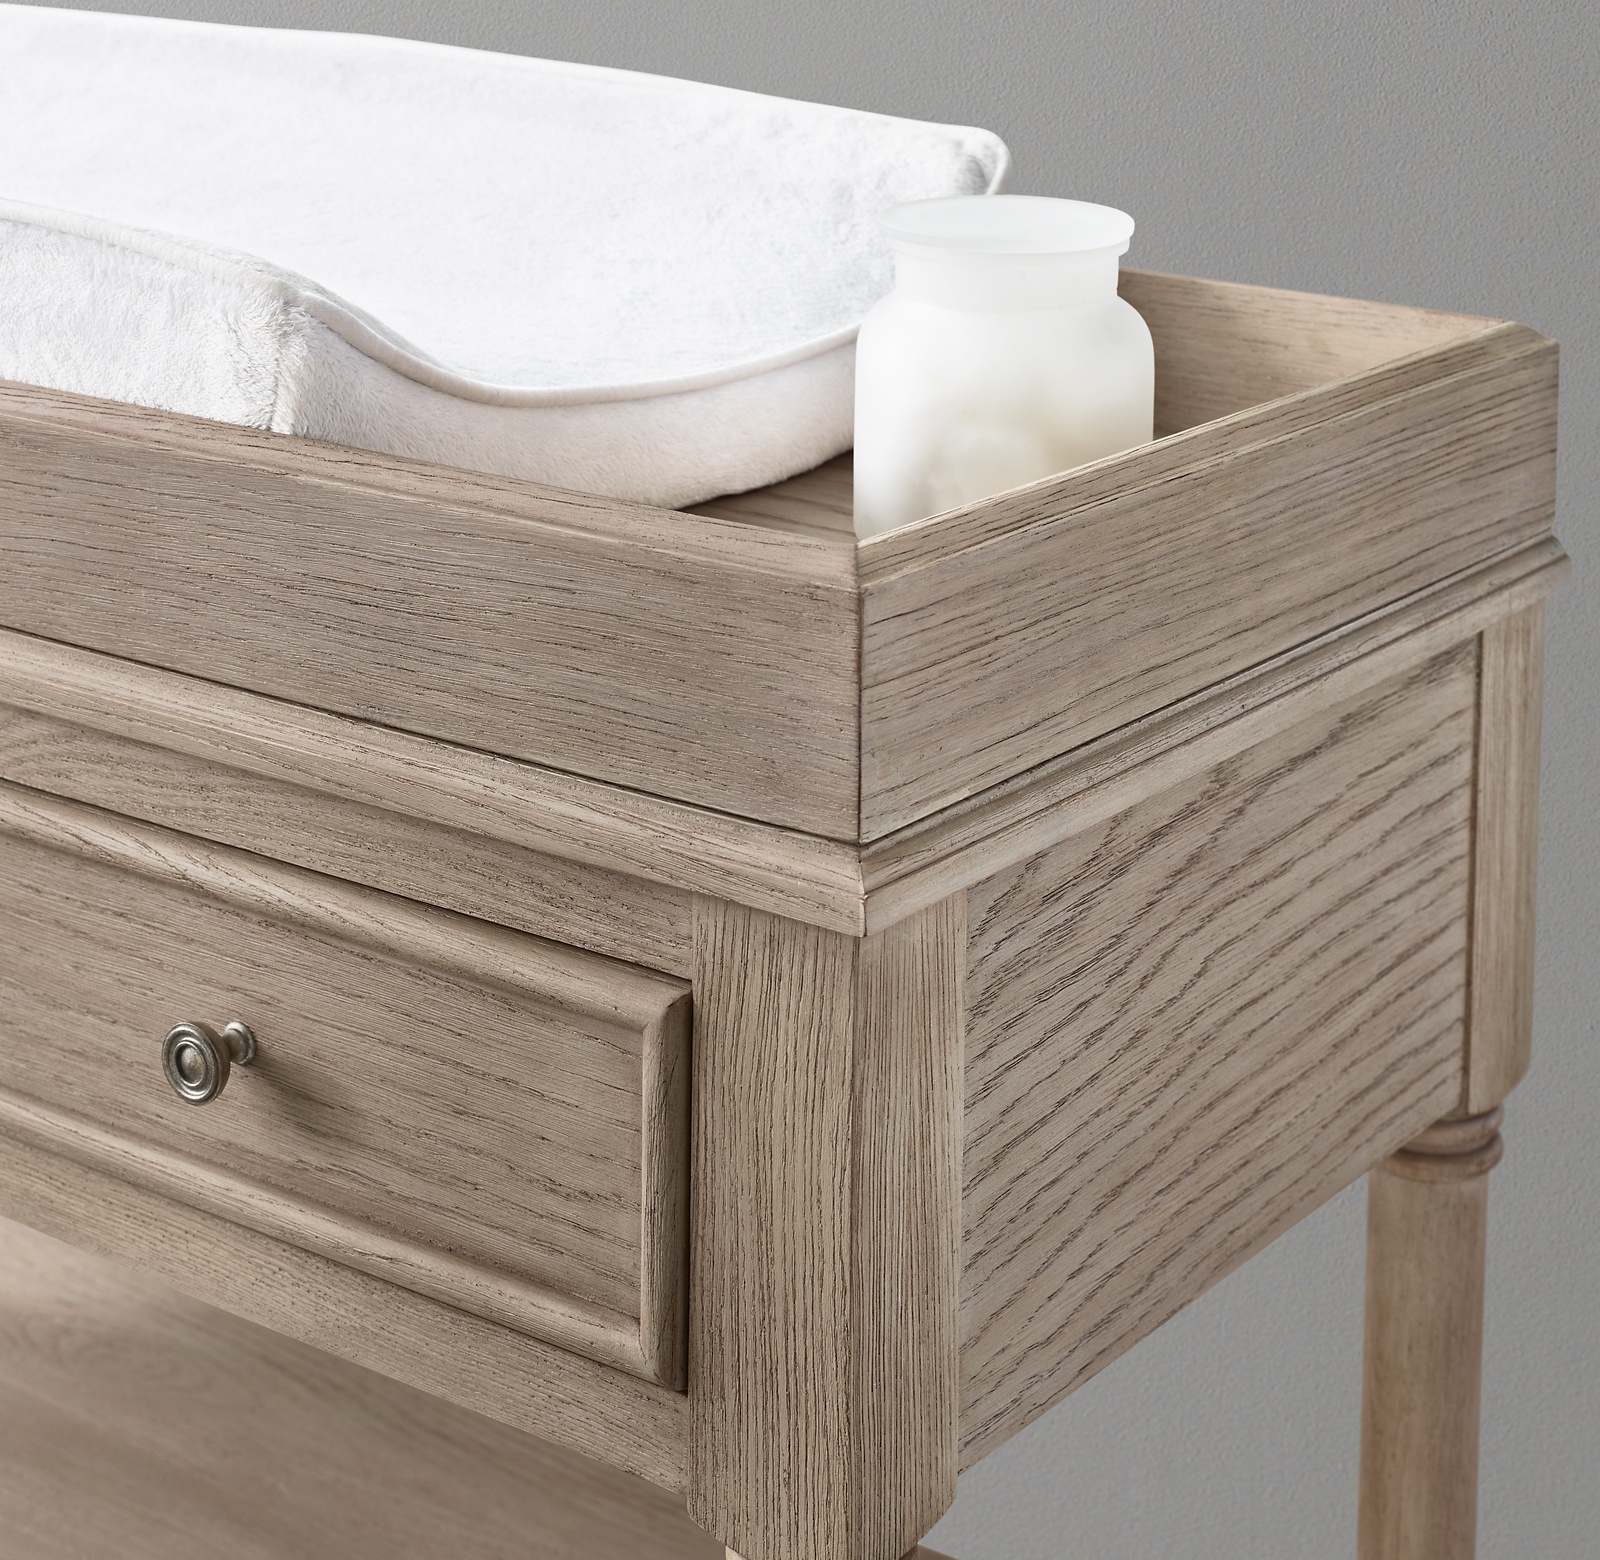 CLASSIC CHANGING TABLE & TOPPER SET - Image 3